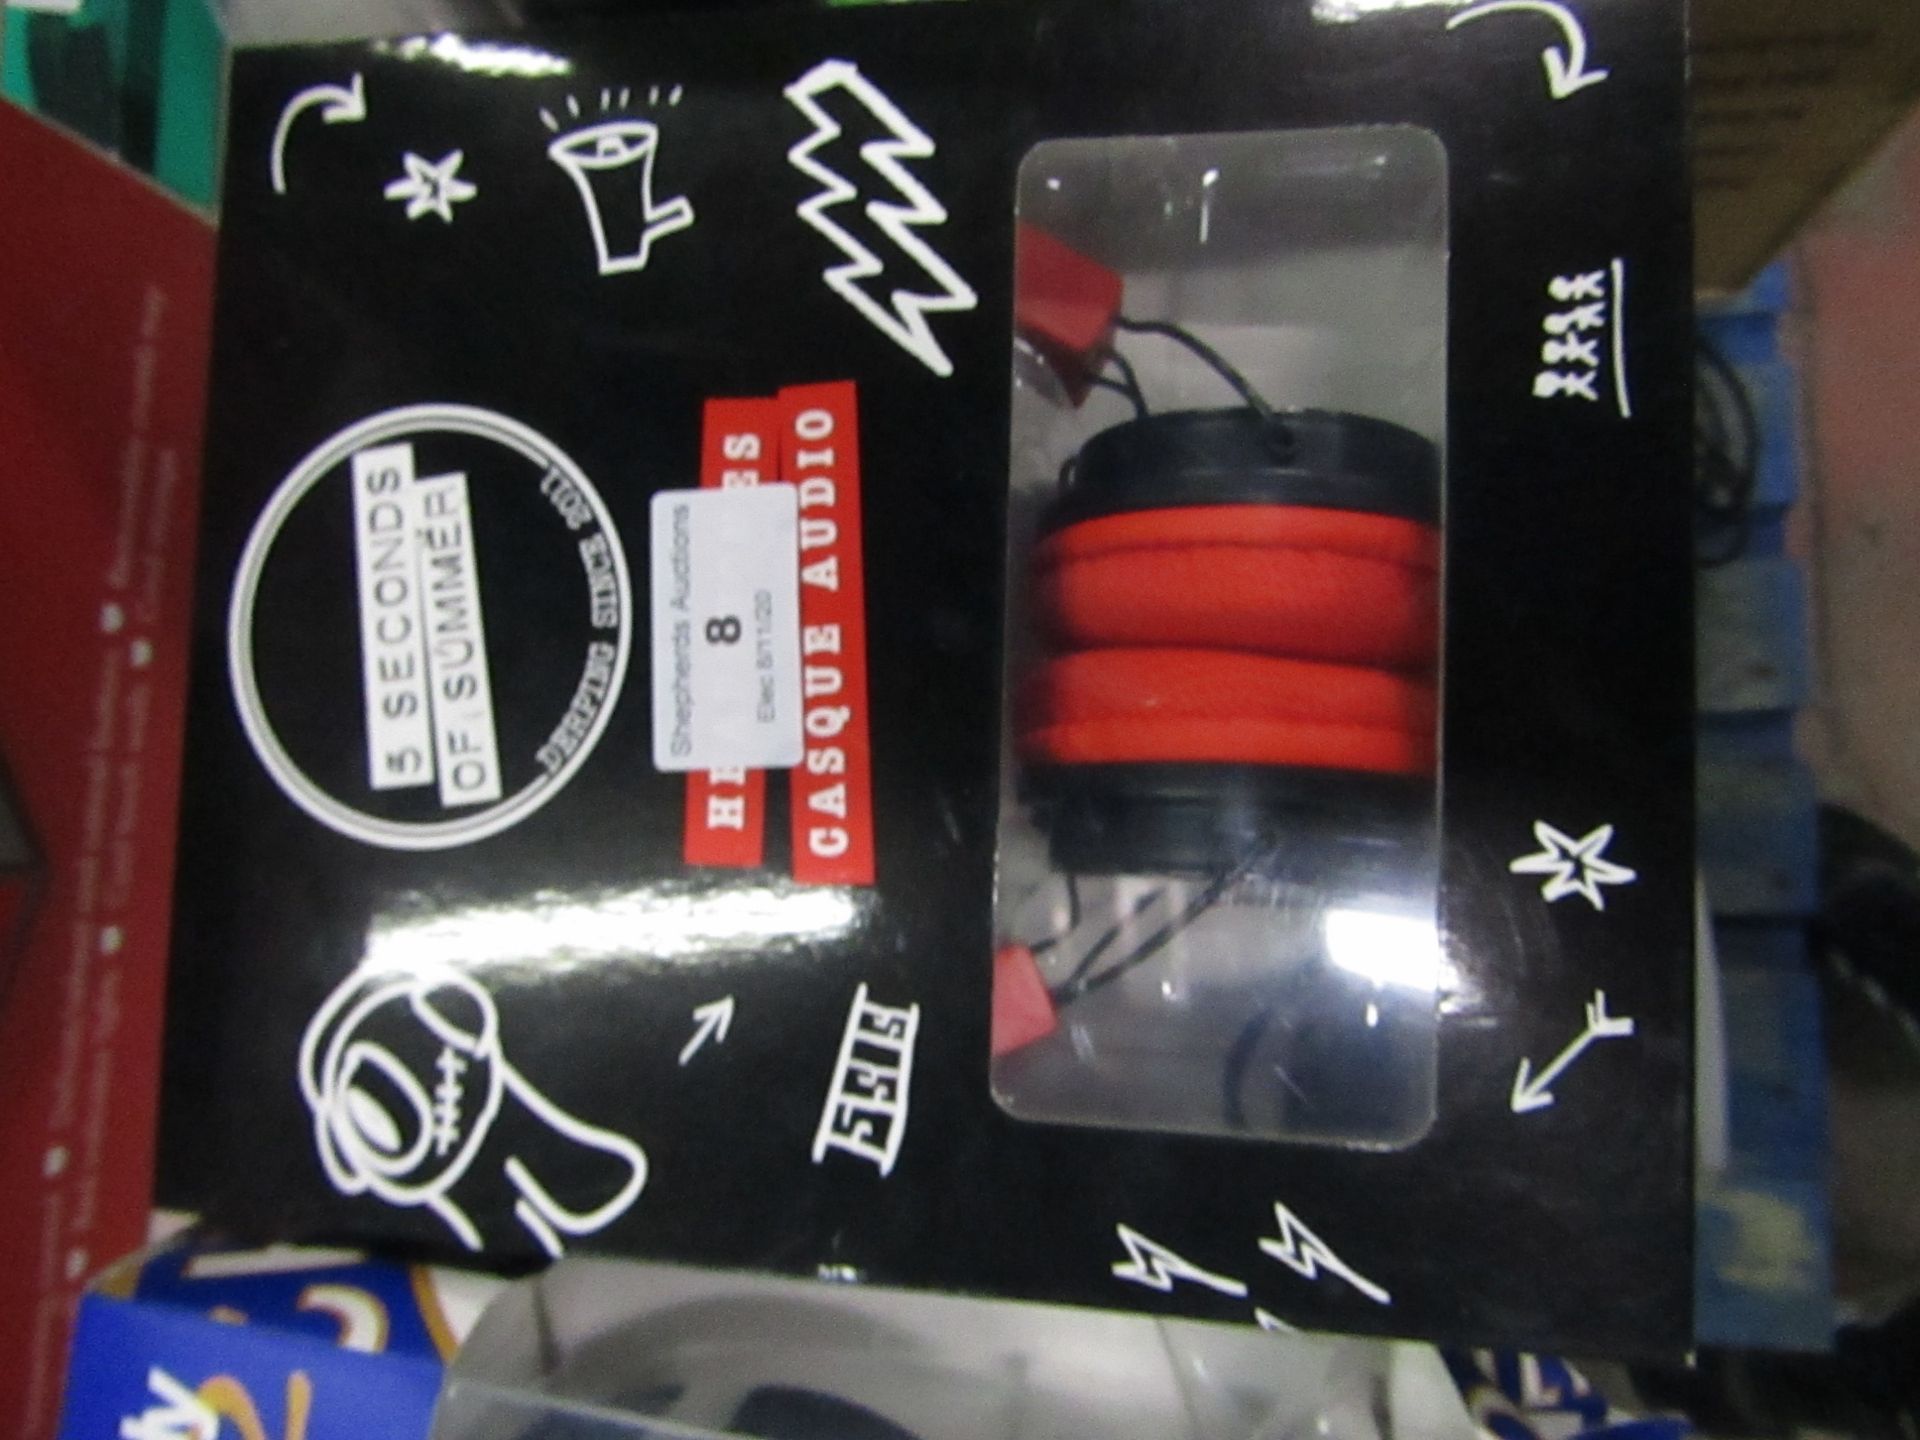 5 Seconds of Summer headphones, boxed and unchecked but looks to be still sealed